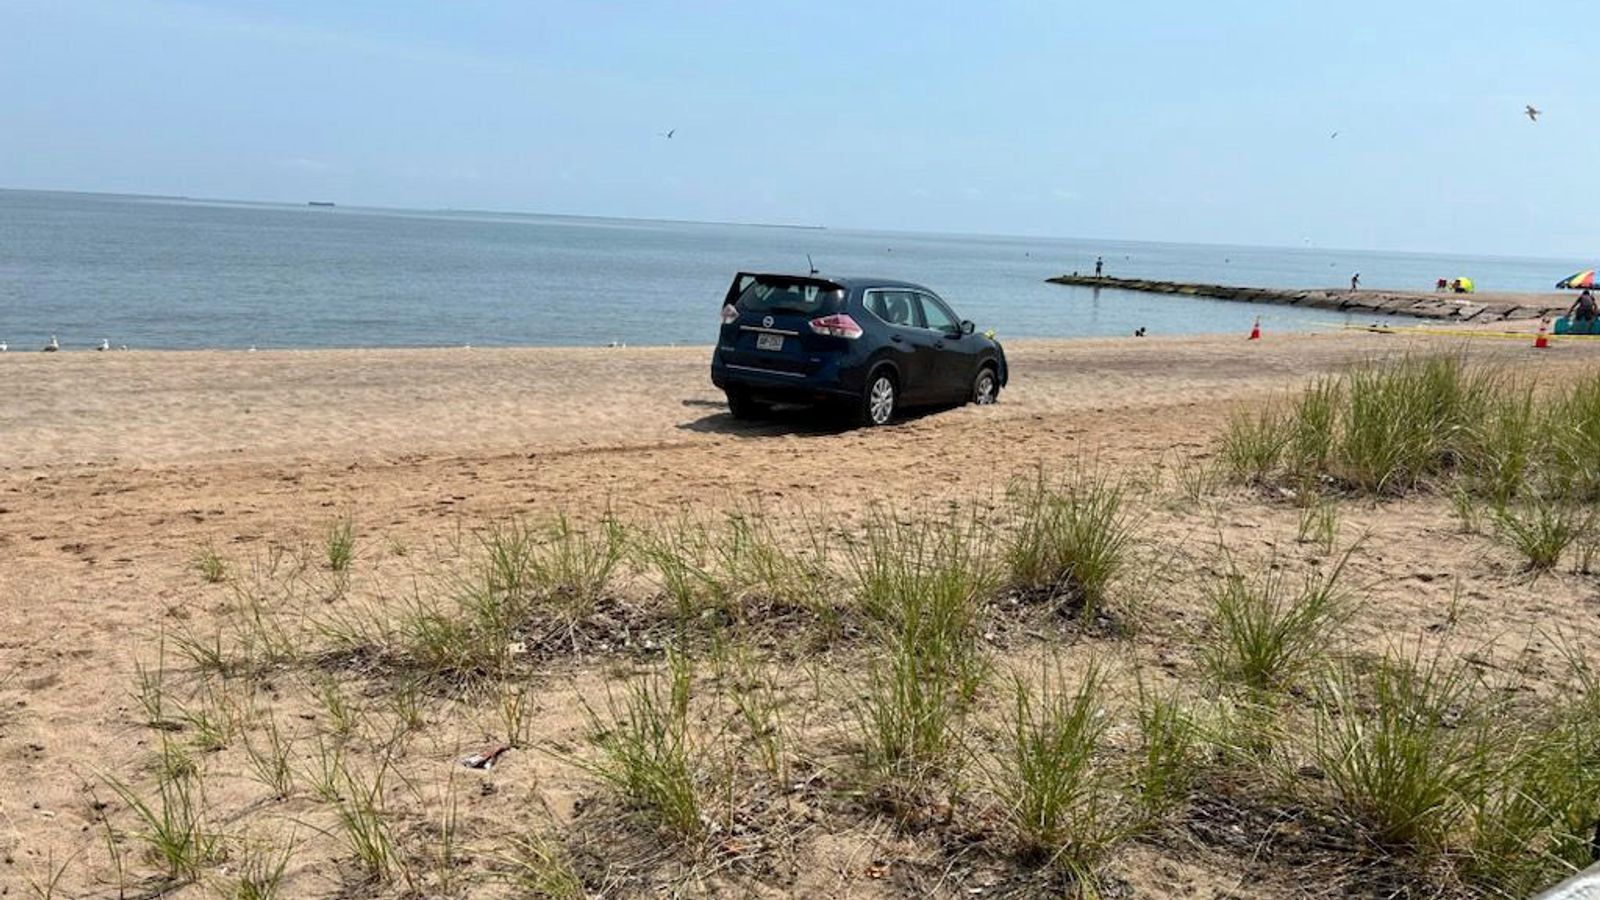 Father 'trying to drown children' at Connecticut beach detained by police